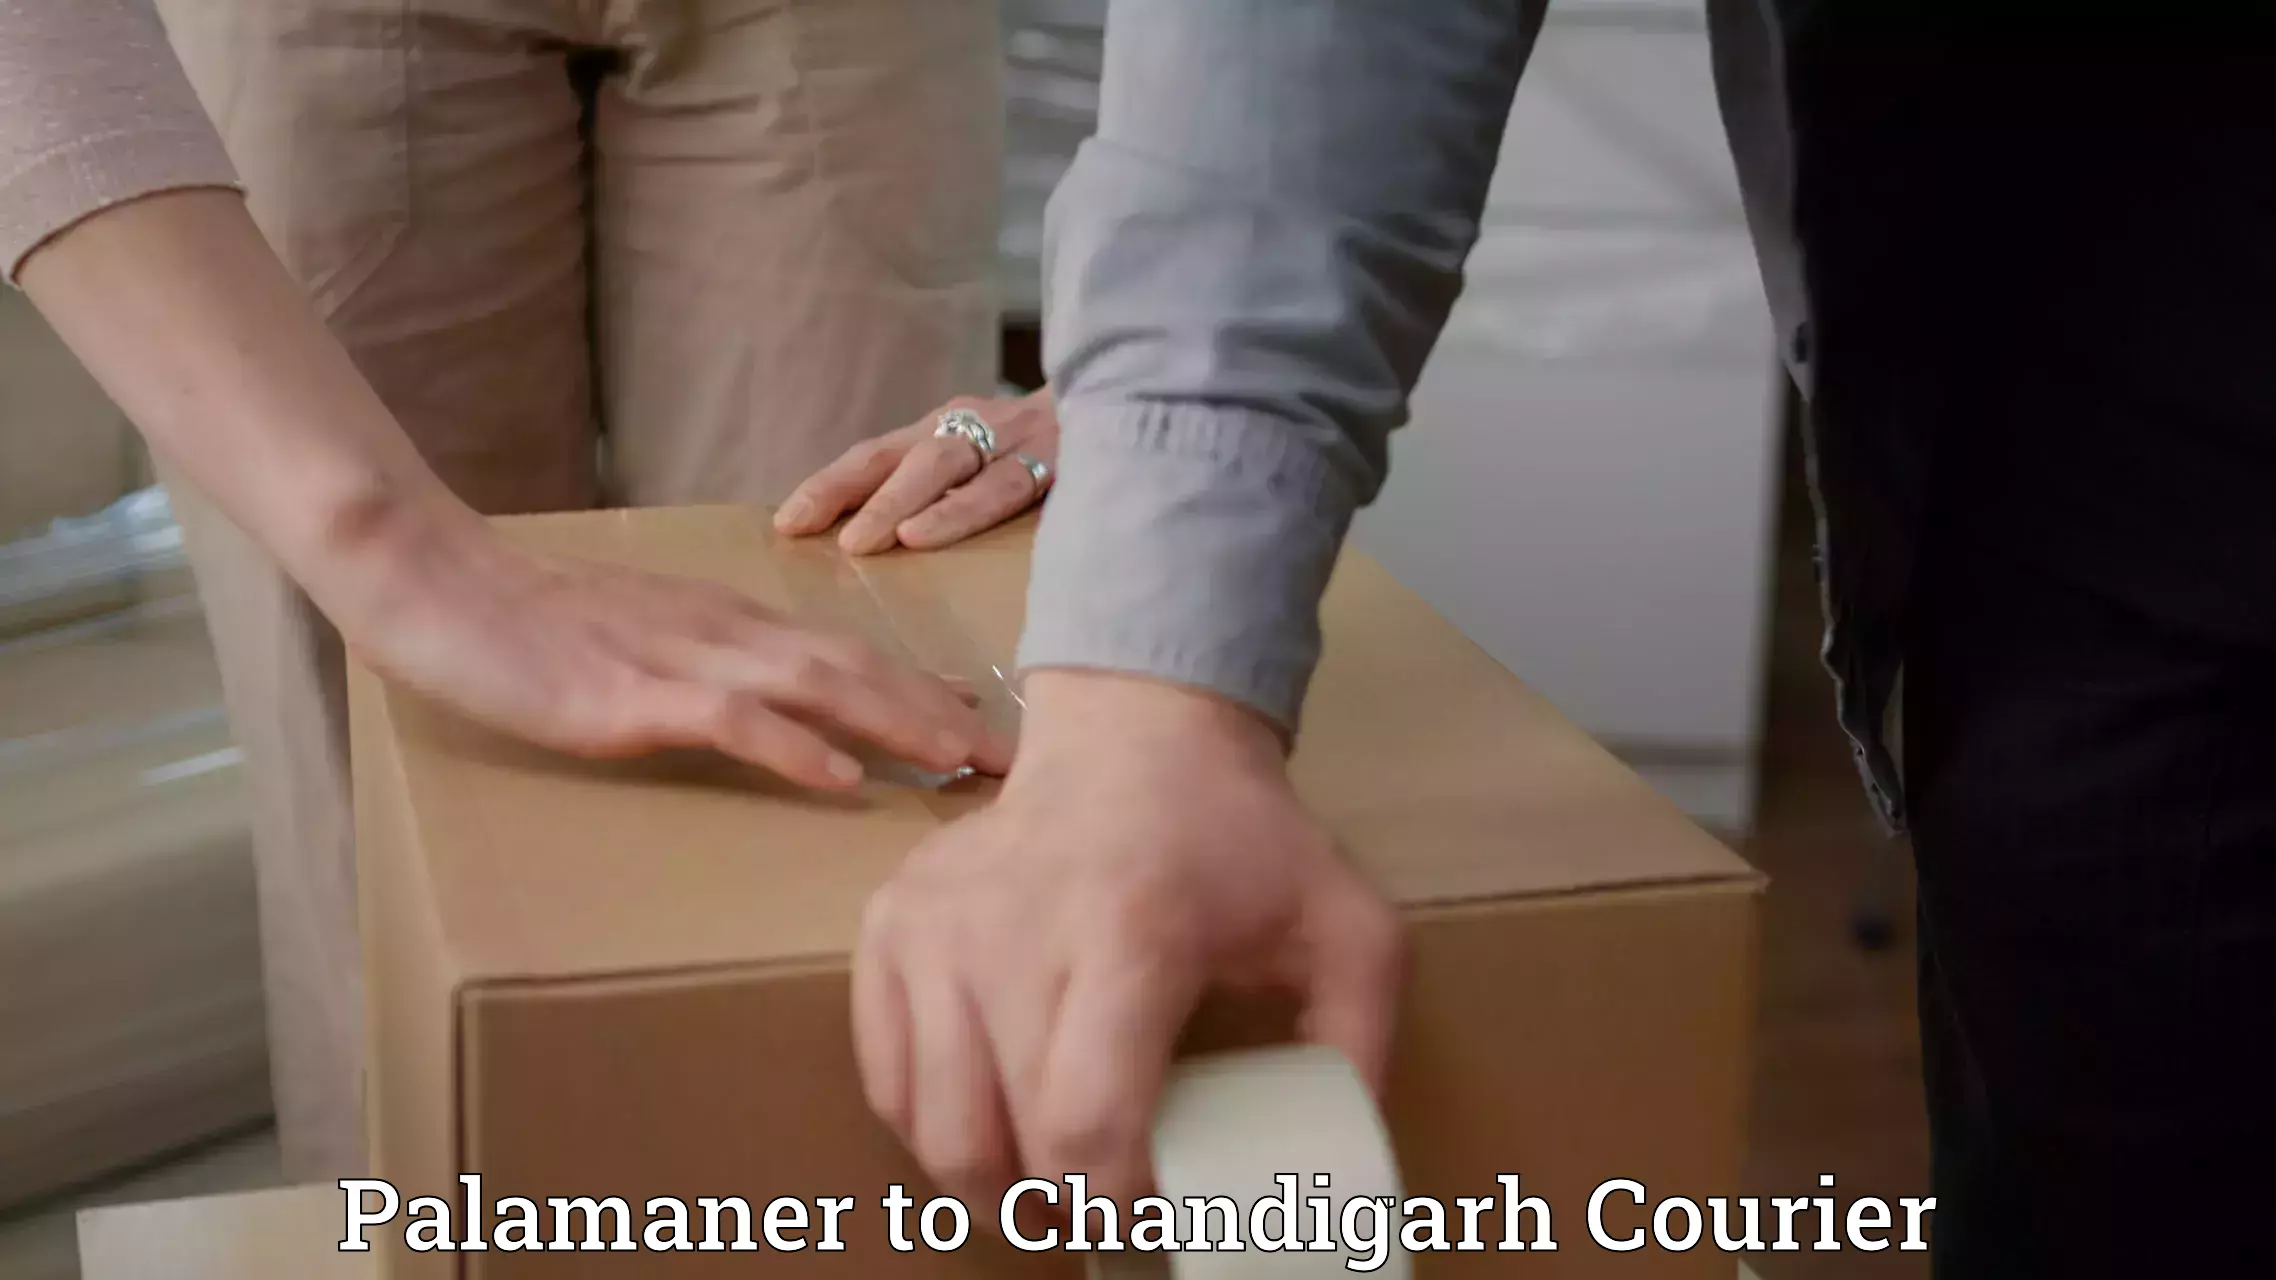 Professional courier handling Palamaner to Chandigarh